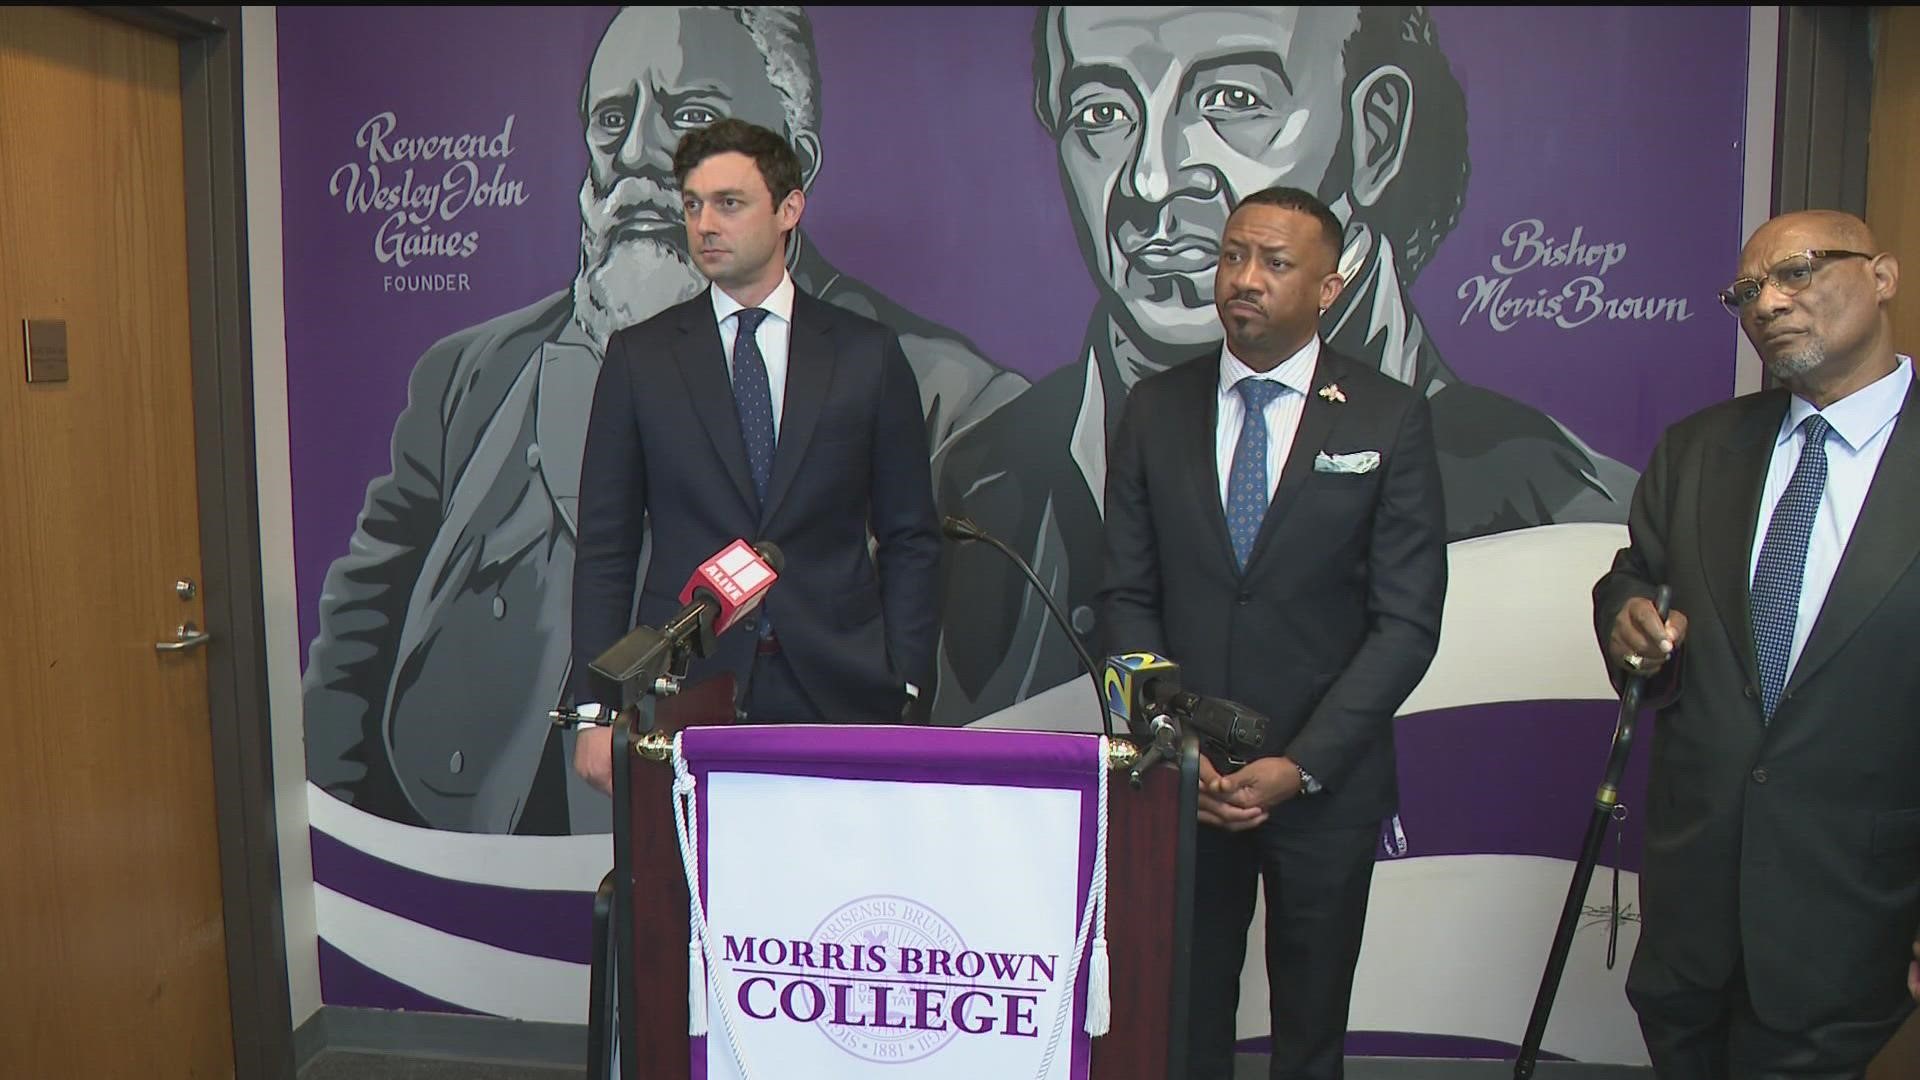 With the grant, Sen. Ossoff said the institution can serve more students and in a better way. The HBCU anticipates enrollment to hit 400 students in the fall.